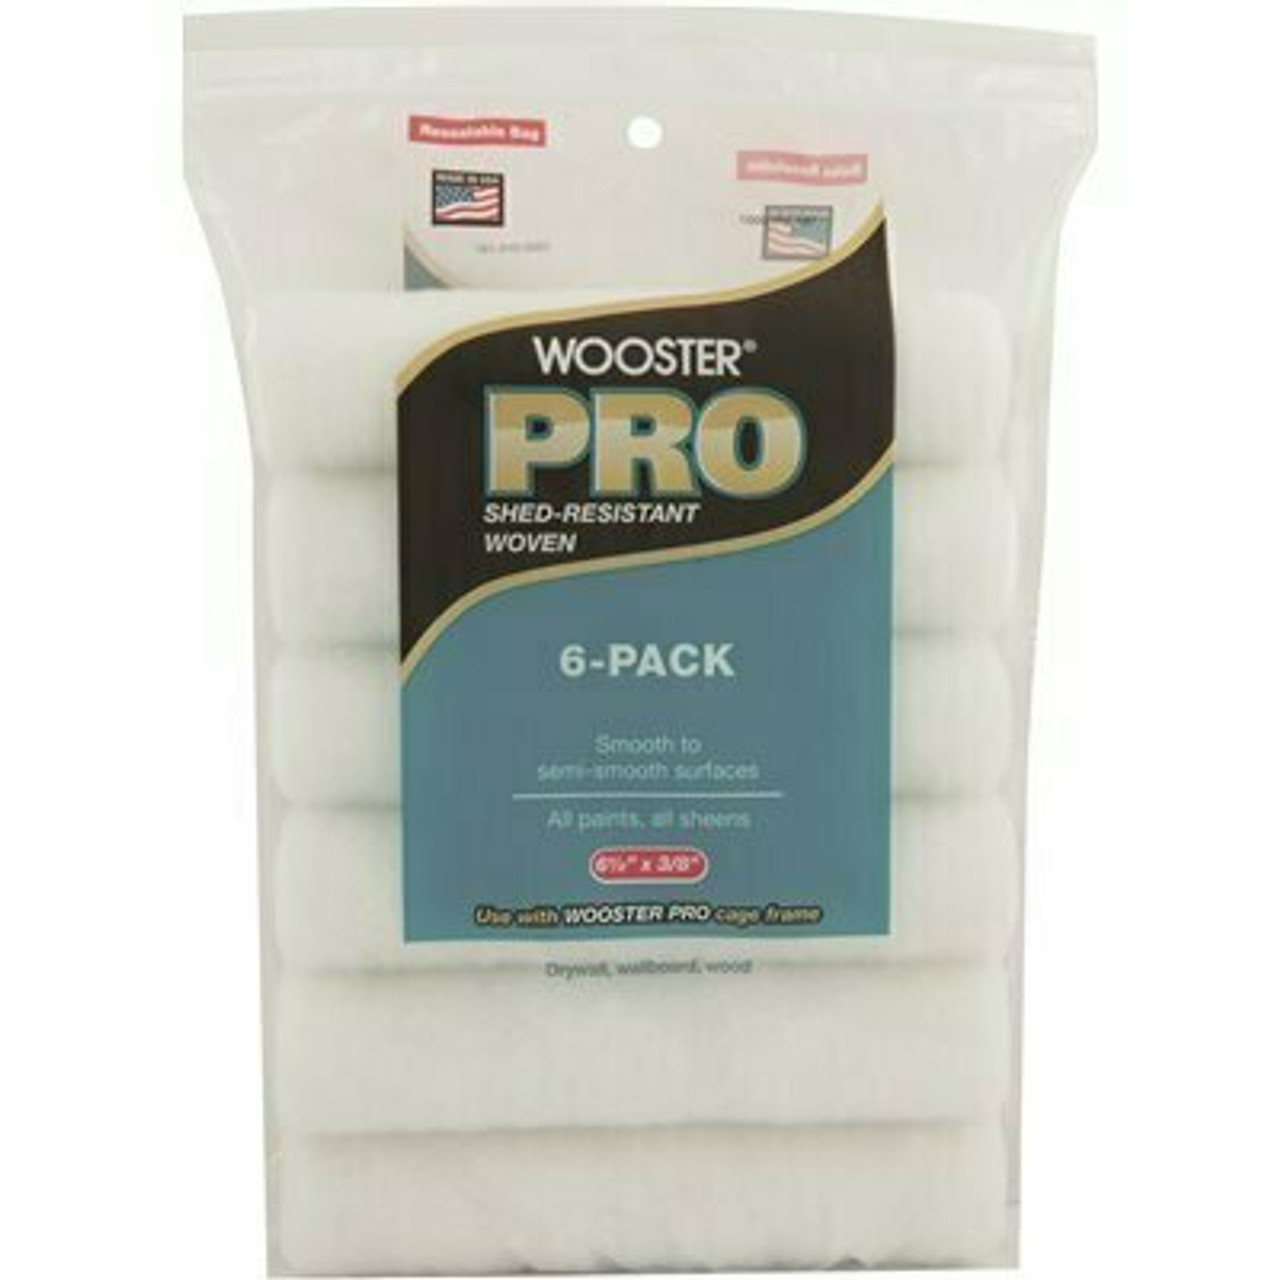 Wooster 6-1/2 In. X 3/8 In. High-Density Woven Cage Frame Roller (6-Pack)